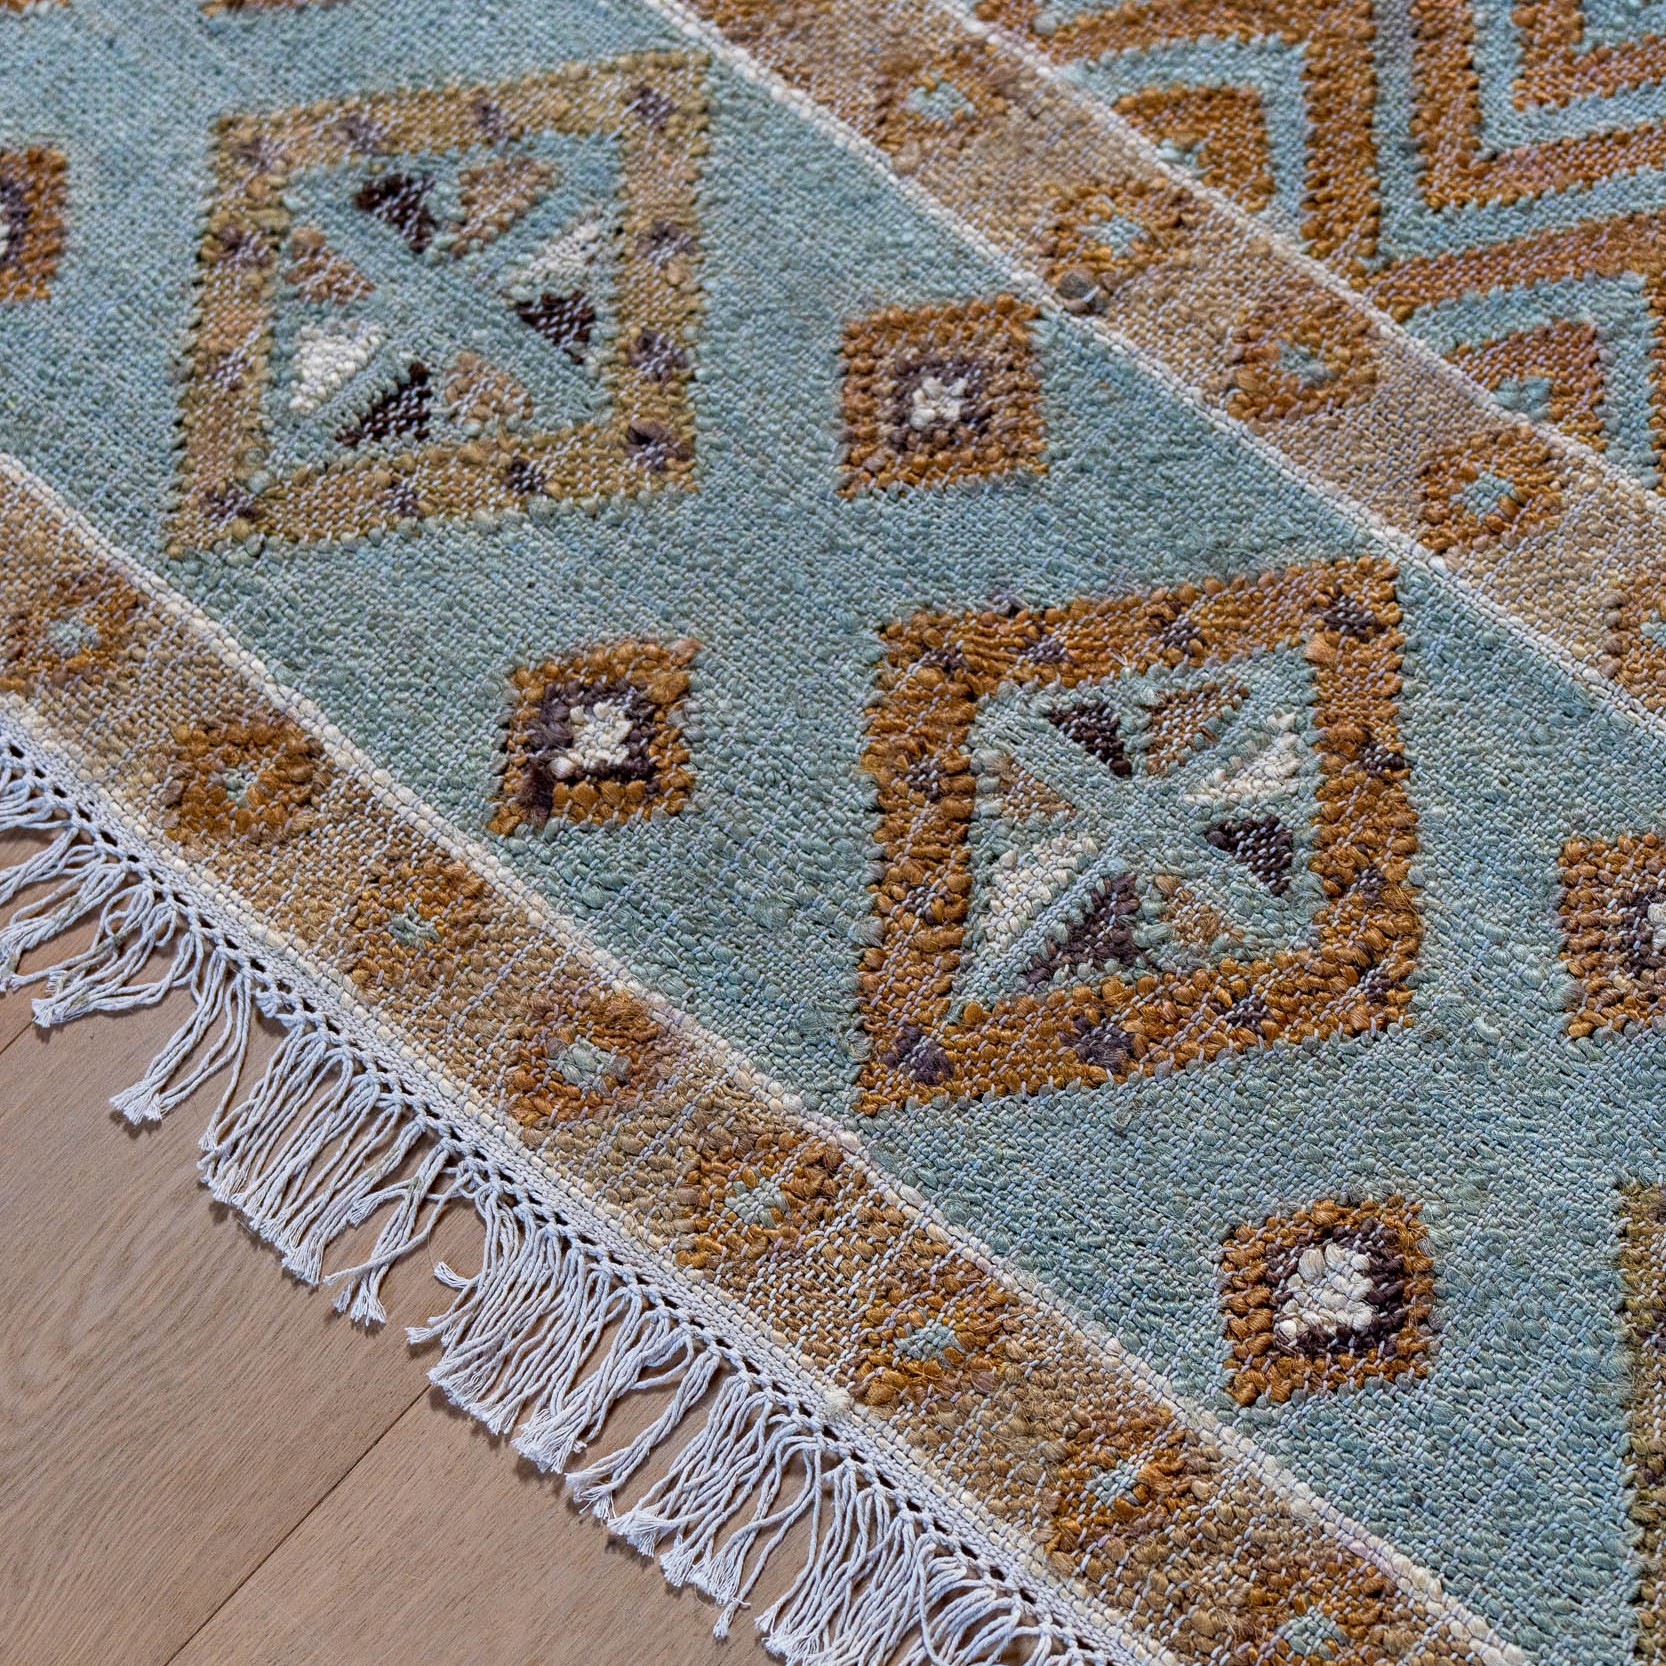 A detail of the 'Una' rug by Sims Hilditch from Tim Page Carpets